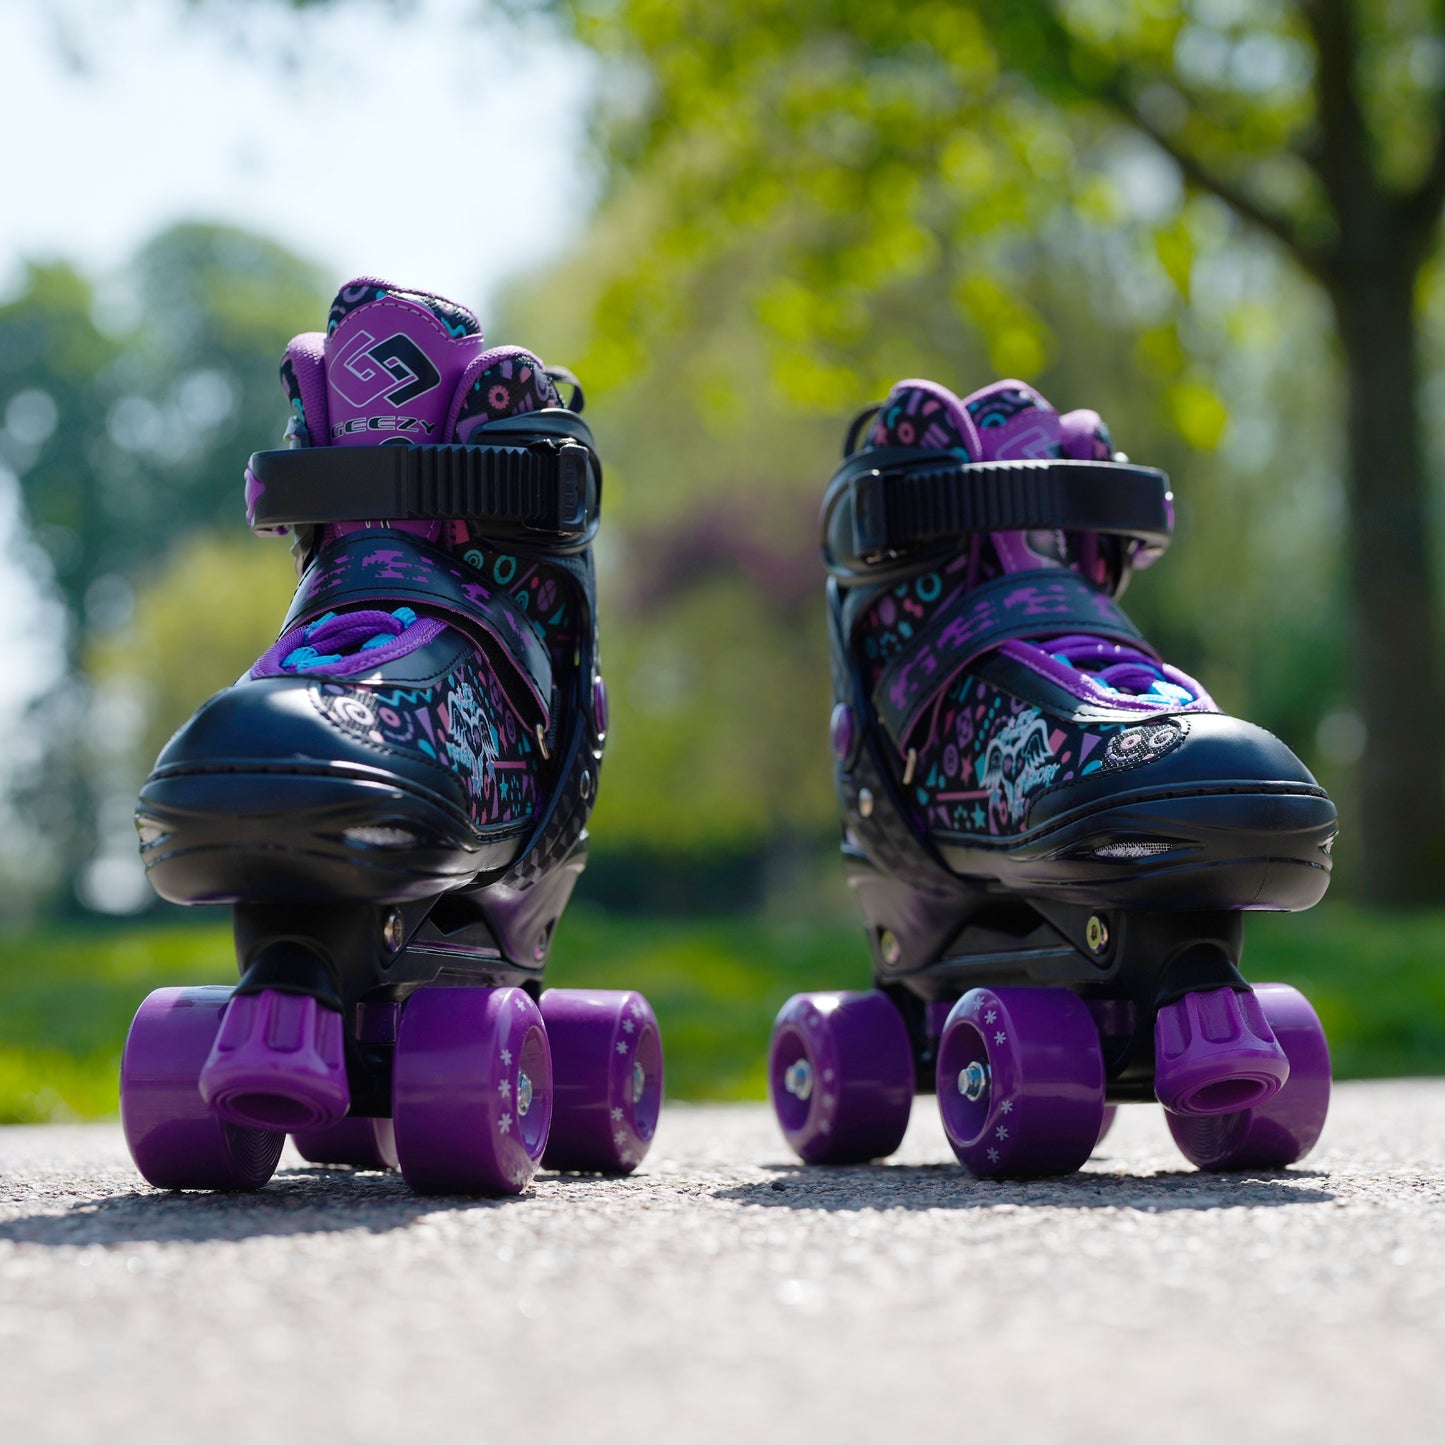 The Magic Toy Shop Roller Skate Purple Roller Skates for Kids with 4 Wheel